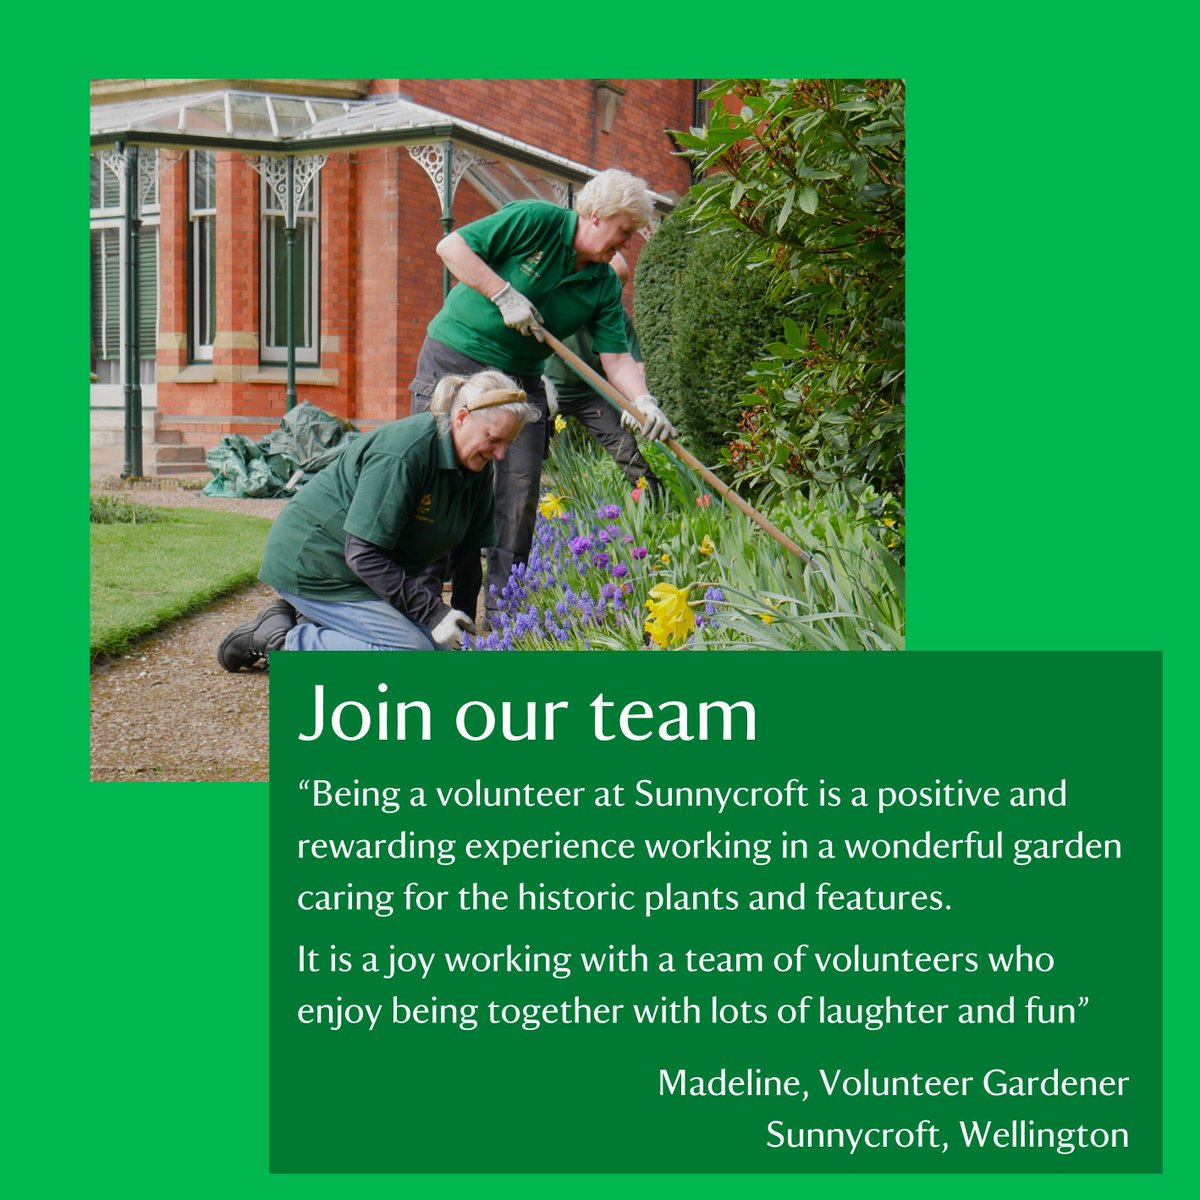 With the longer and brighter days, its now a great opportunity to enjoy the outdoors, and becoming a gardening volunteer is an excellent way to do this! We are currently recruiting for more gardening volunteers at Sunnycroft. Interested? Email us at join-in@nationaltrust.org.uk